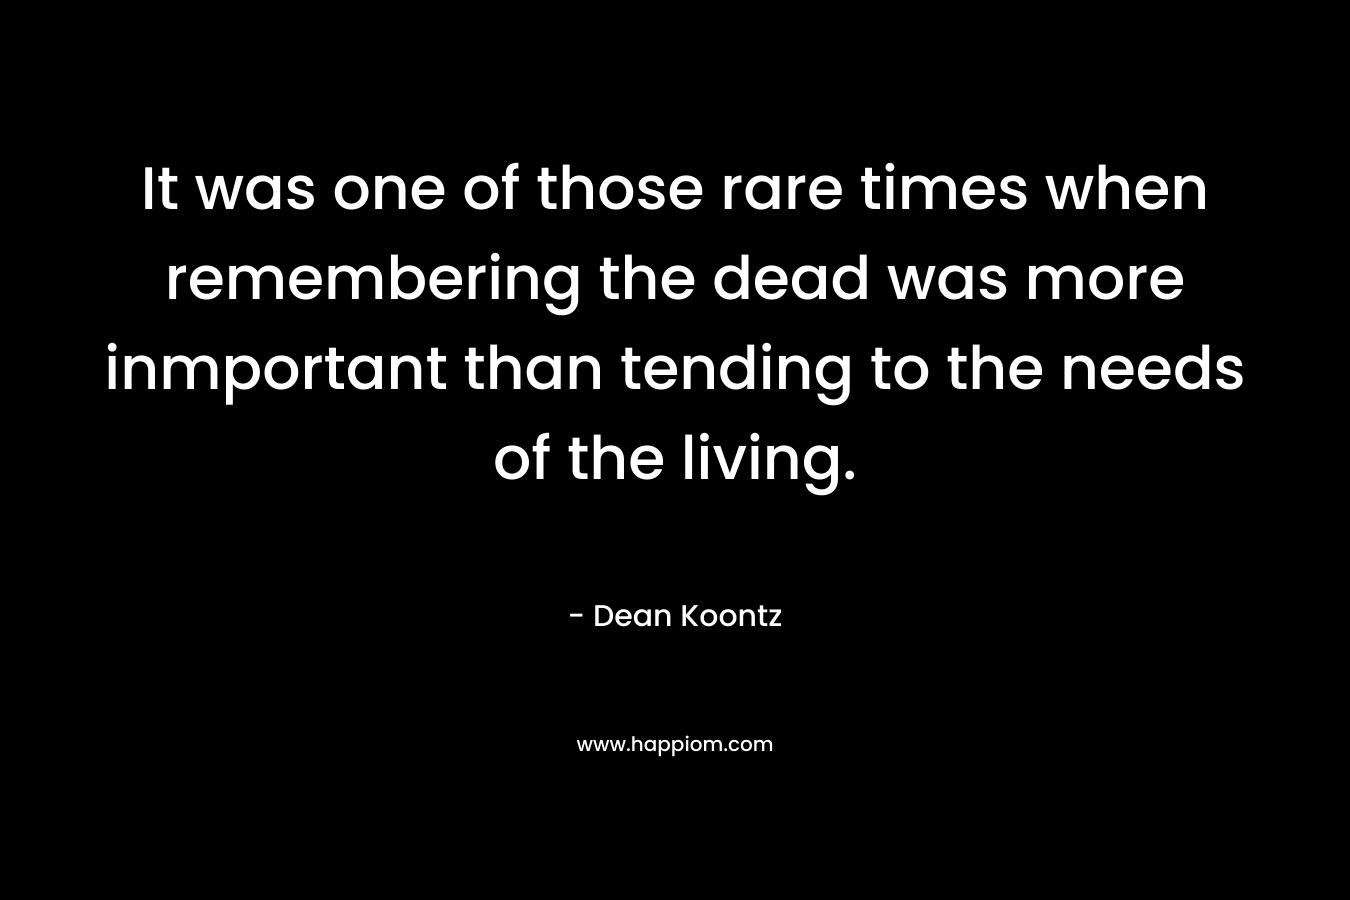 It was one of those rare times when remembering the dead was more inmportant than tending to the needs of the living. – Dean Koontz